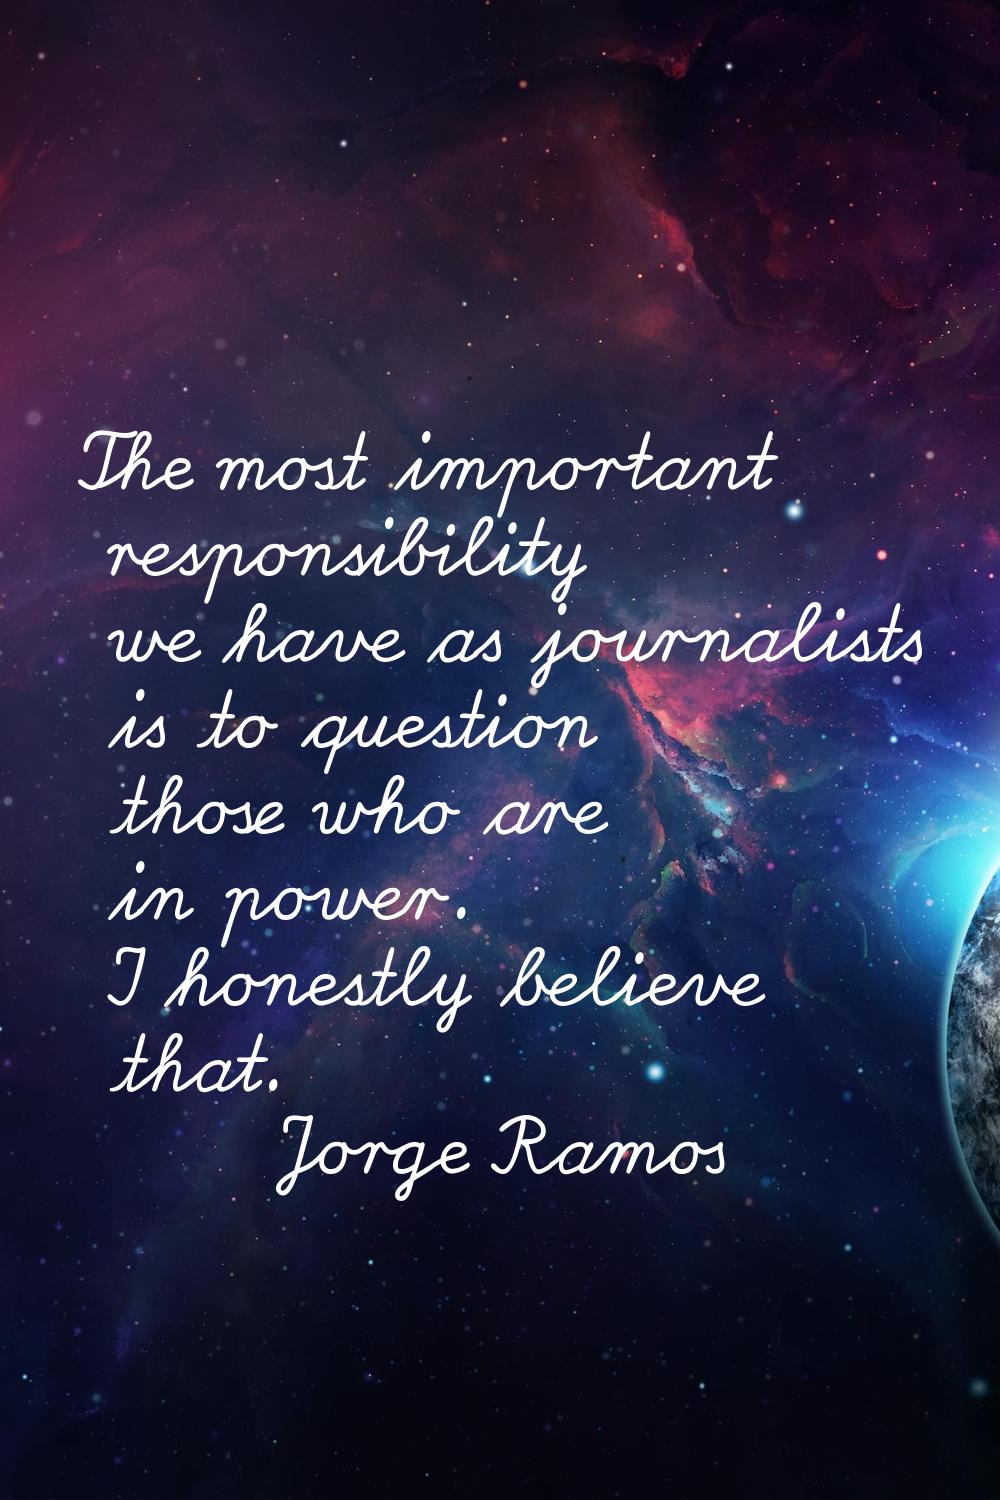 The most important responsibility we have as journalists is to question those who are in power. I h